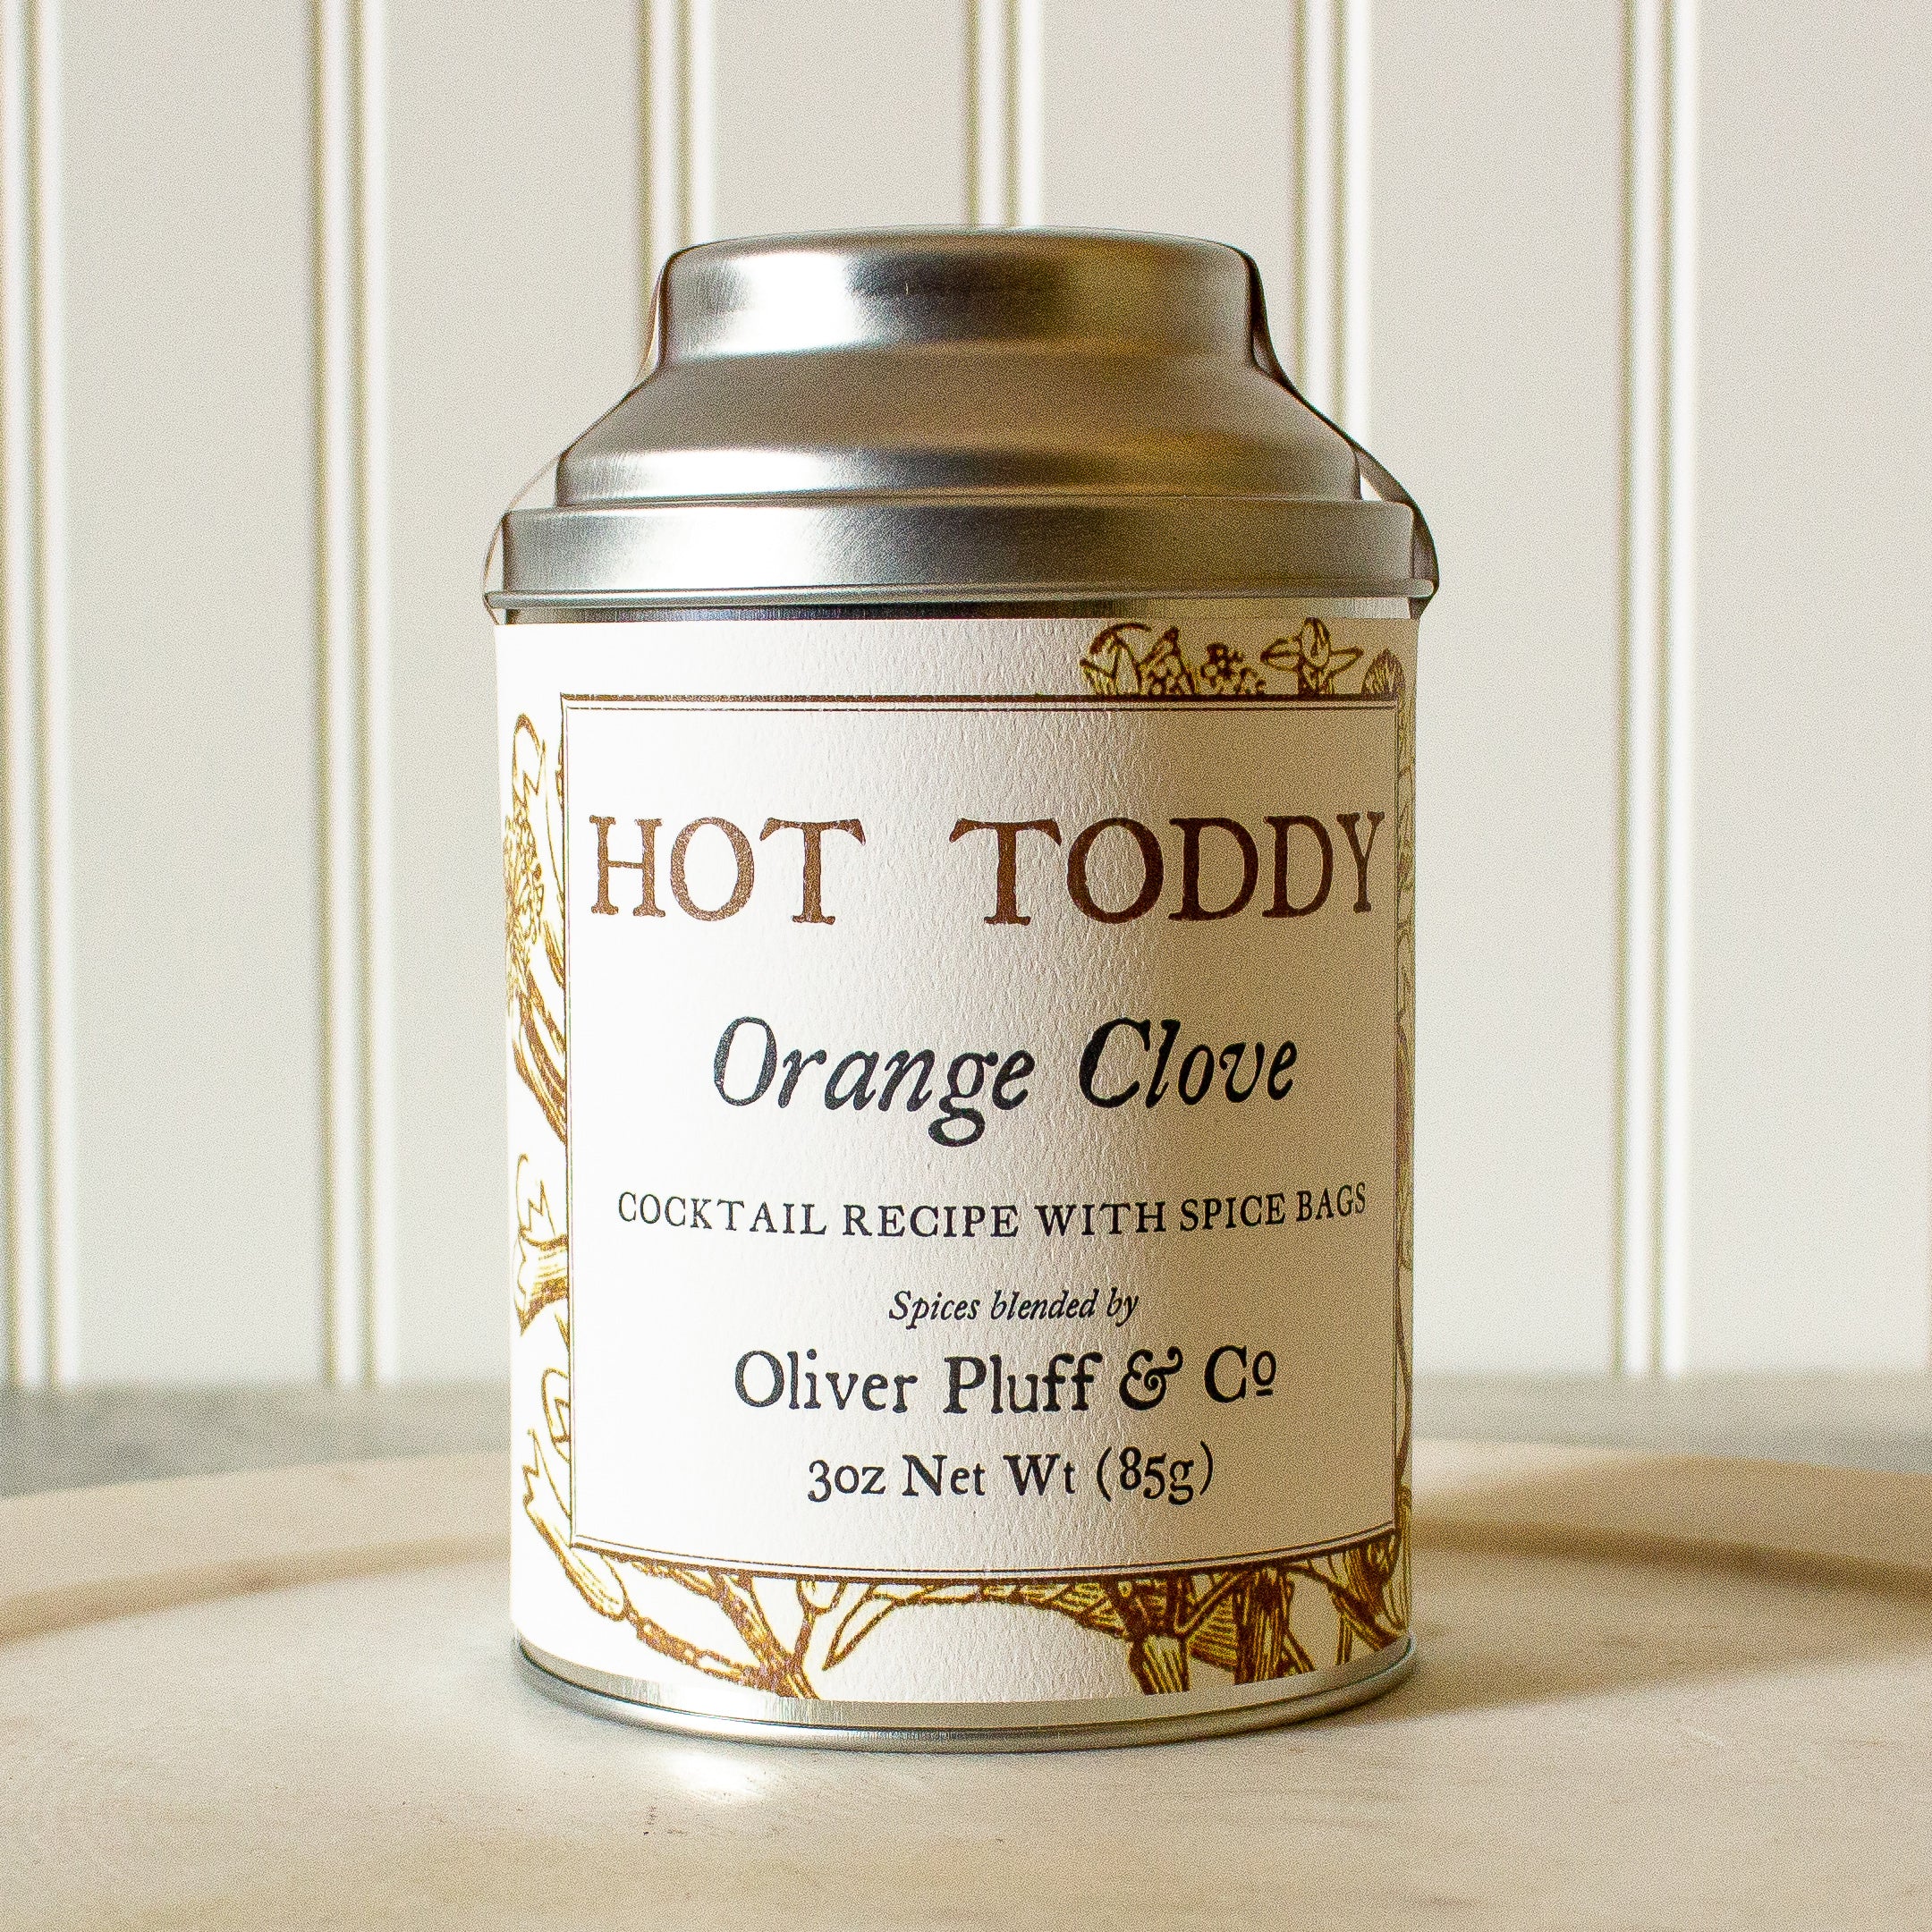 Brew Up Winter Bliss: 3-Gallon Orange Clove Hot Toddy Kit (Cozy Spiced Cocktail)